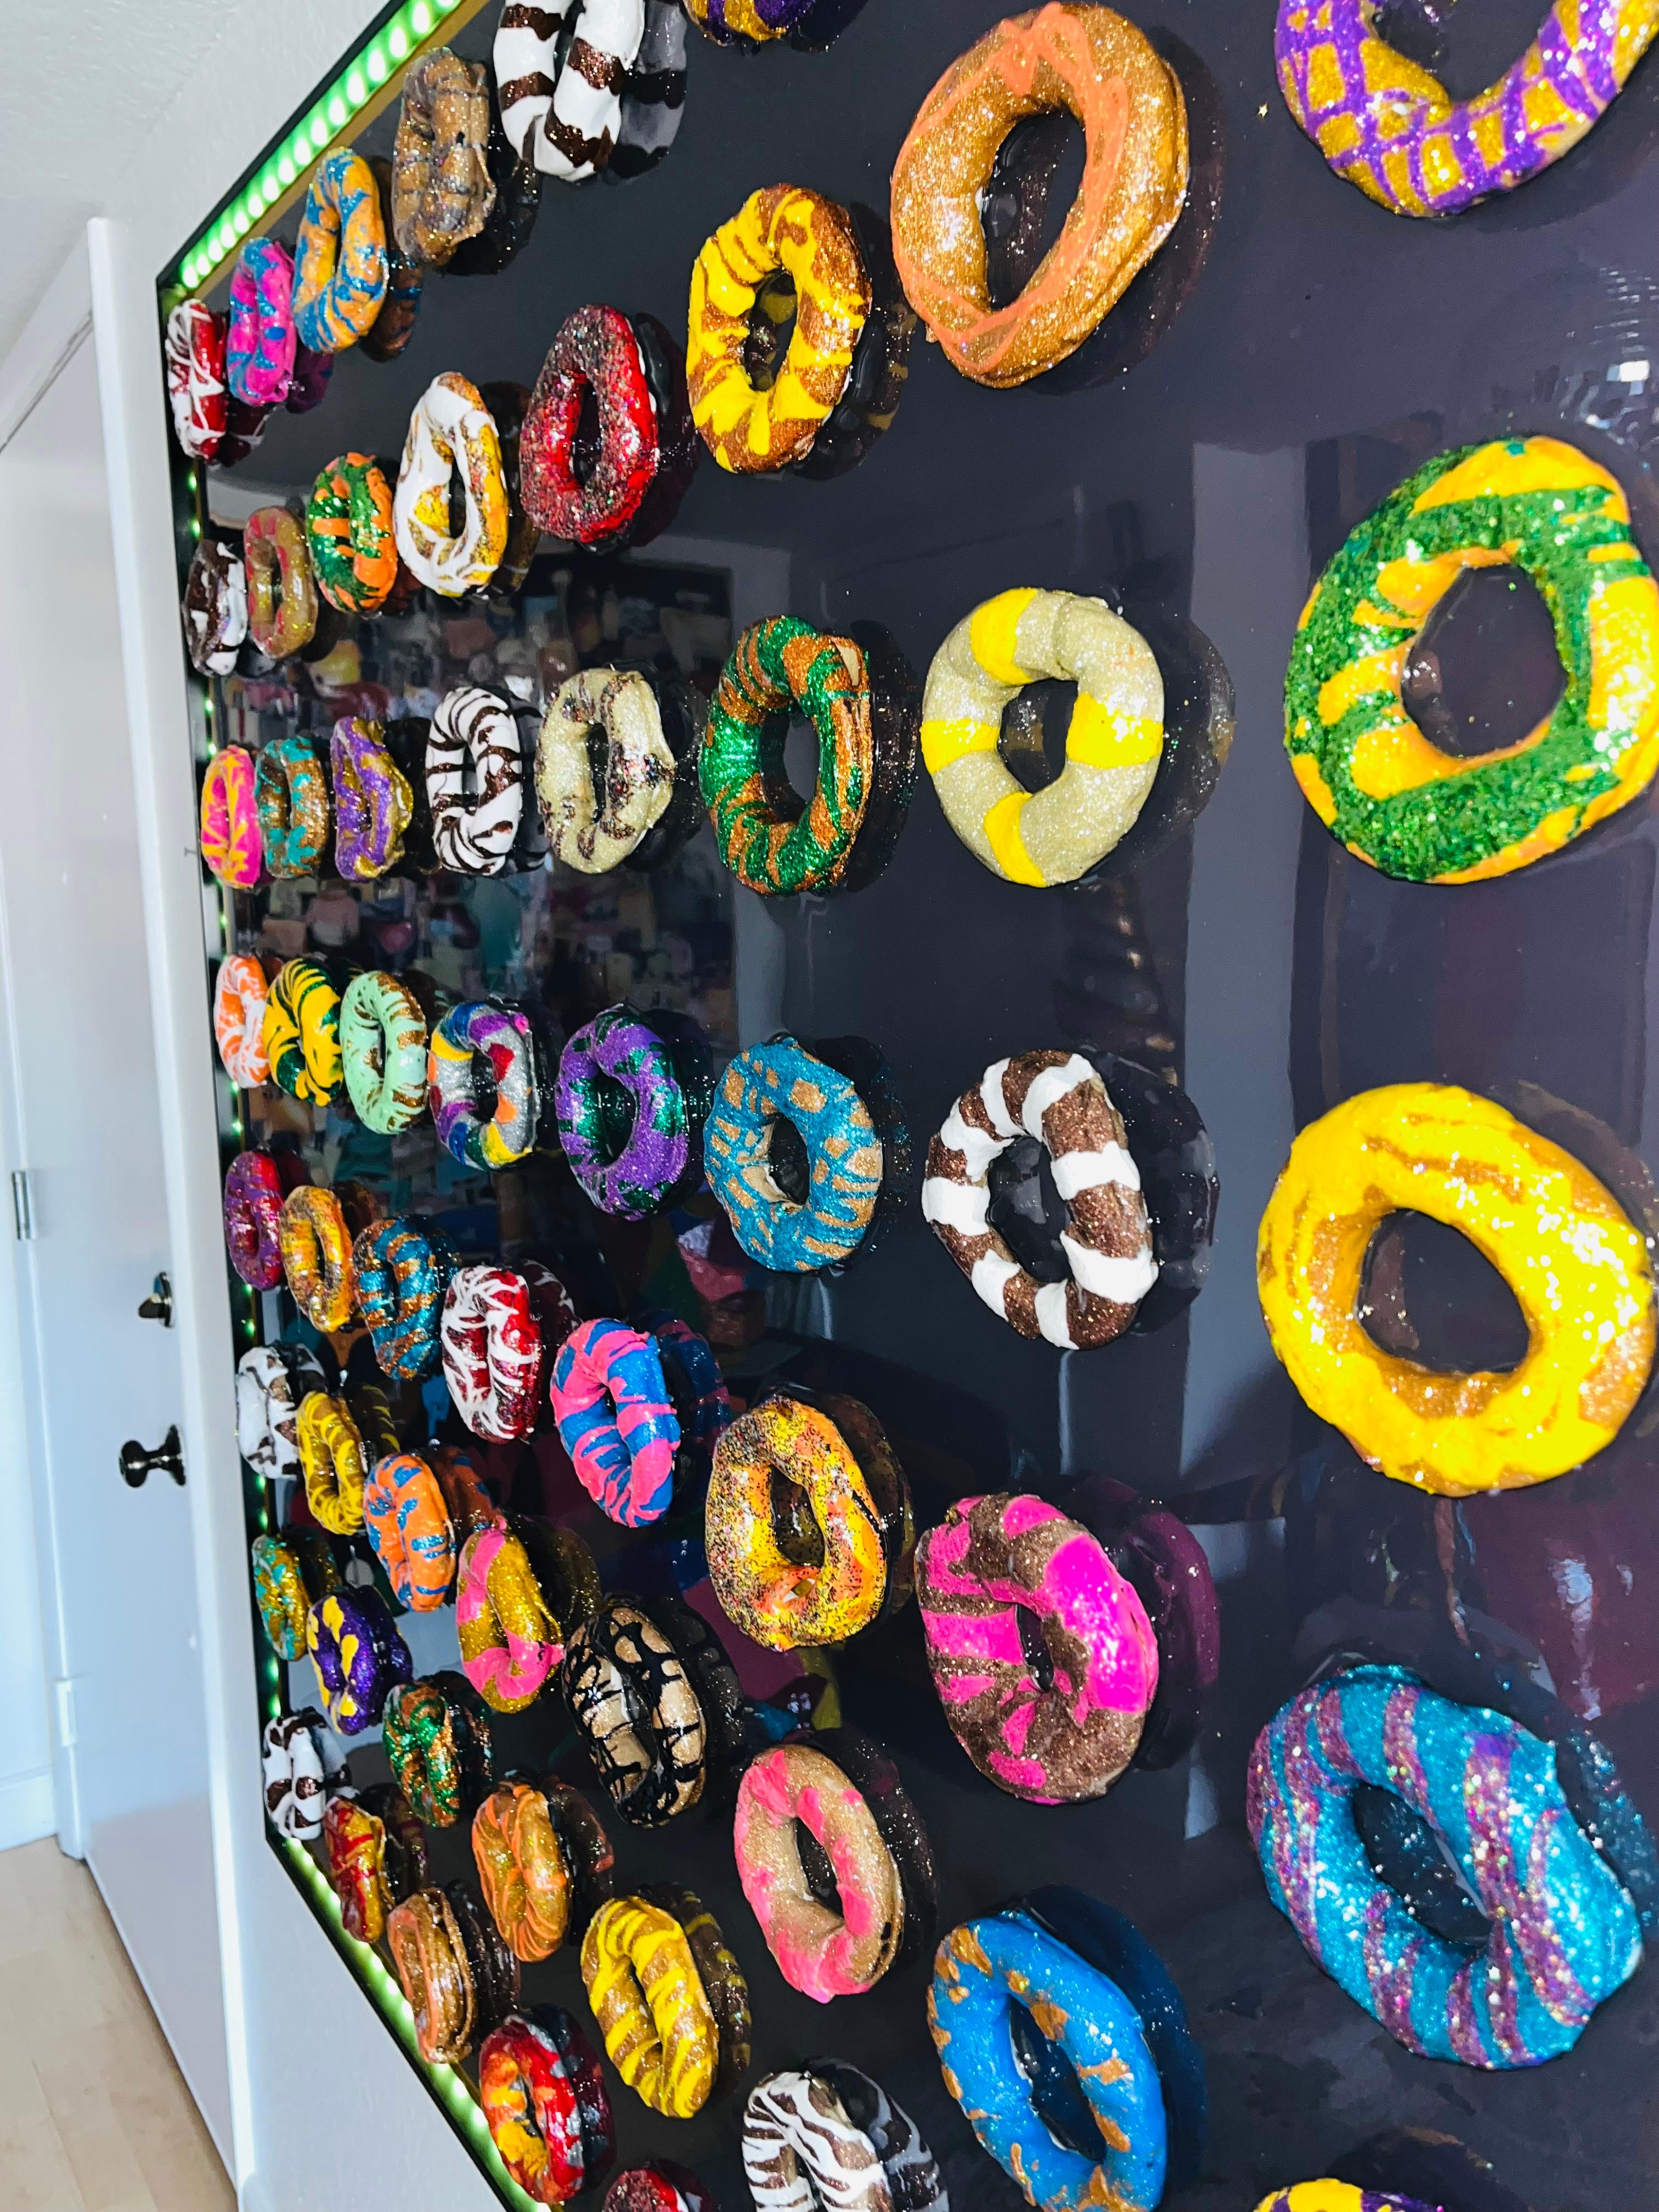 *LIMITED TIME SALE > TAKE ADVANTAGE OF IT!!!

DONUT FESTIVAL IN MARS is another masterpiece created by Mauro Oliveira. 

This art is highly labored and meticulous. Each donut was made one by one with several steps to follow: each piece was prime